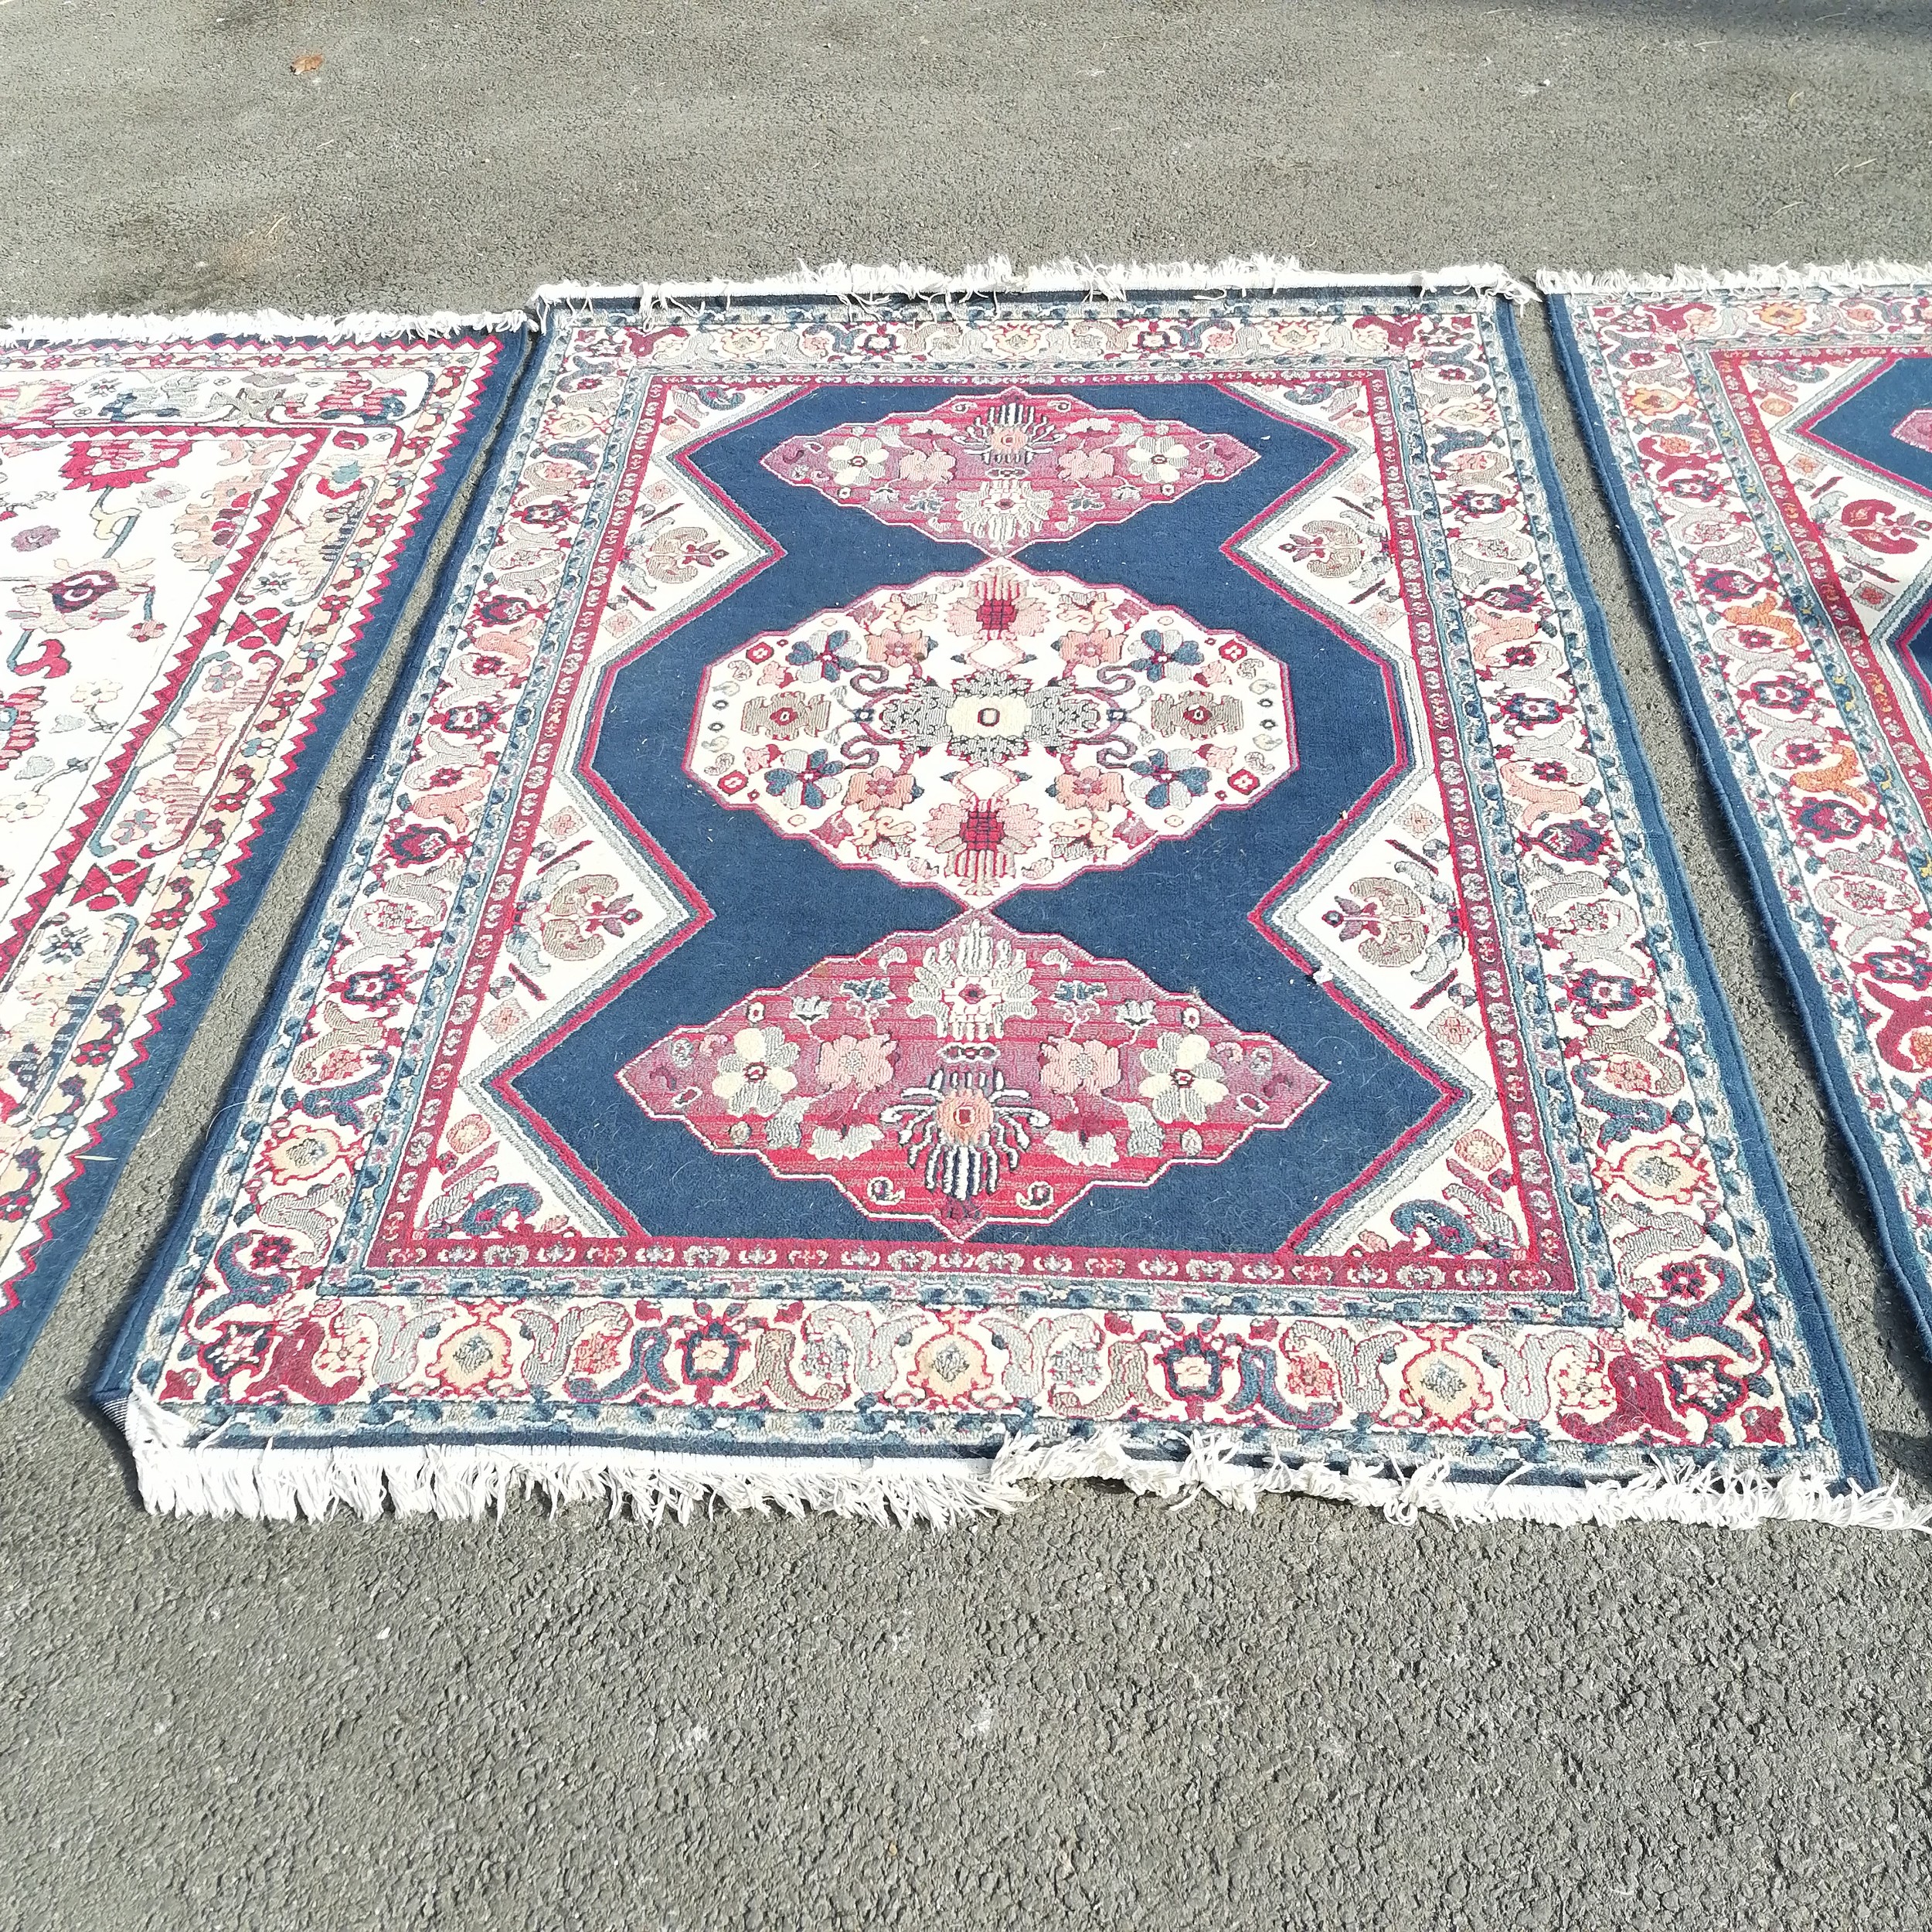 3 x blue ground carpets 230 cm x 168 cm in used condition - Image 3 of 4